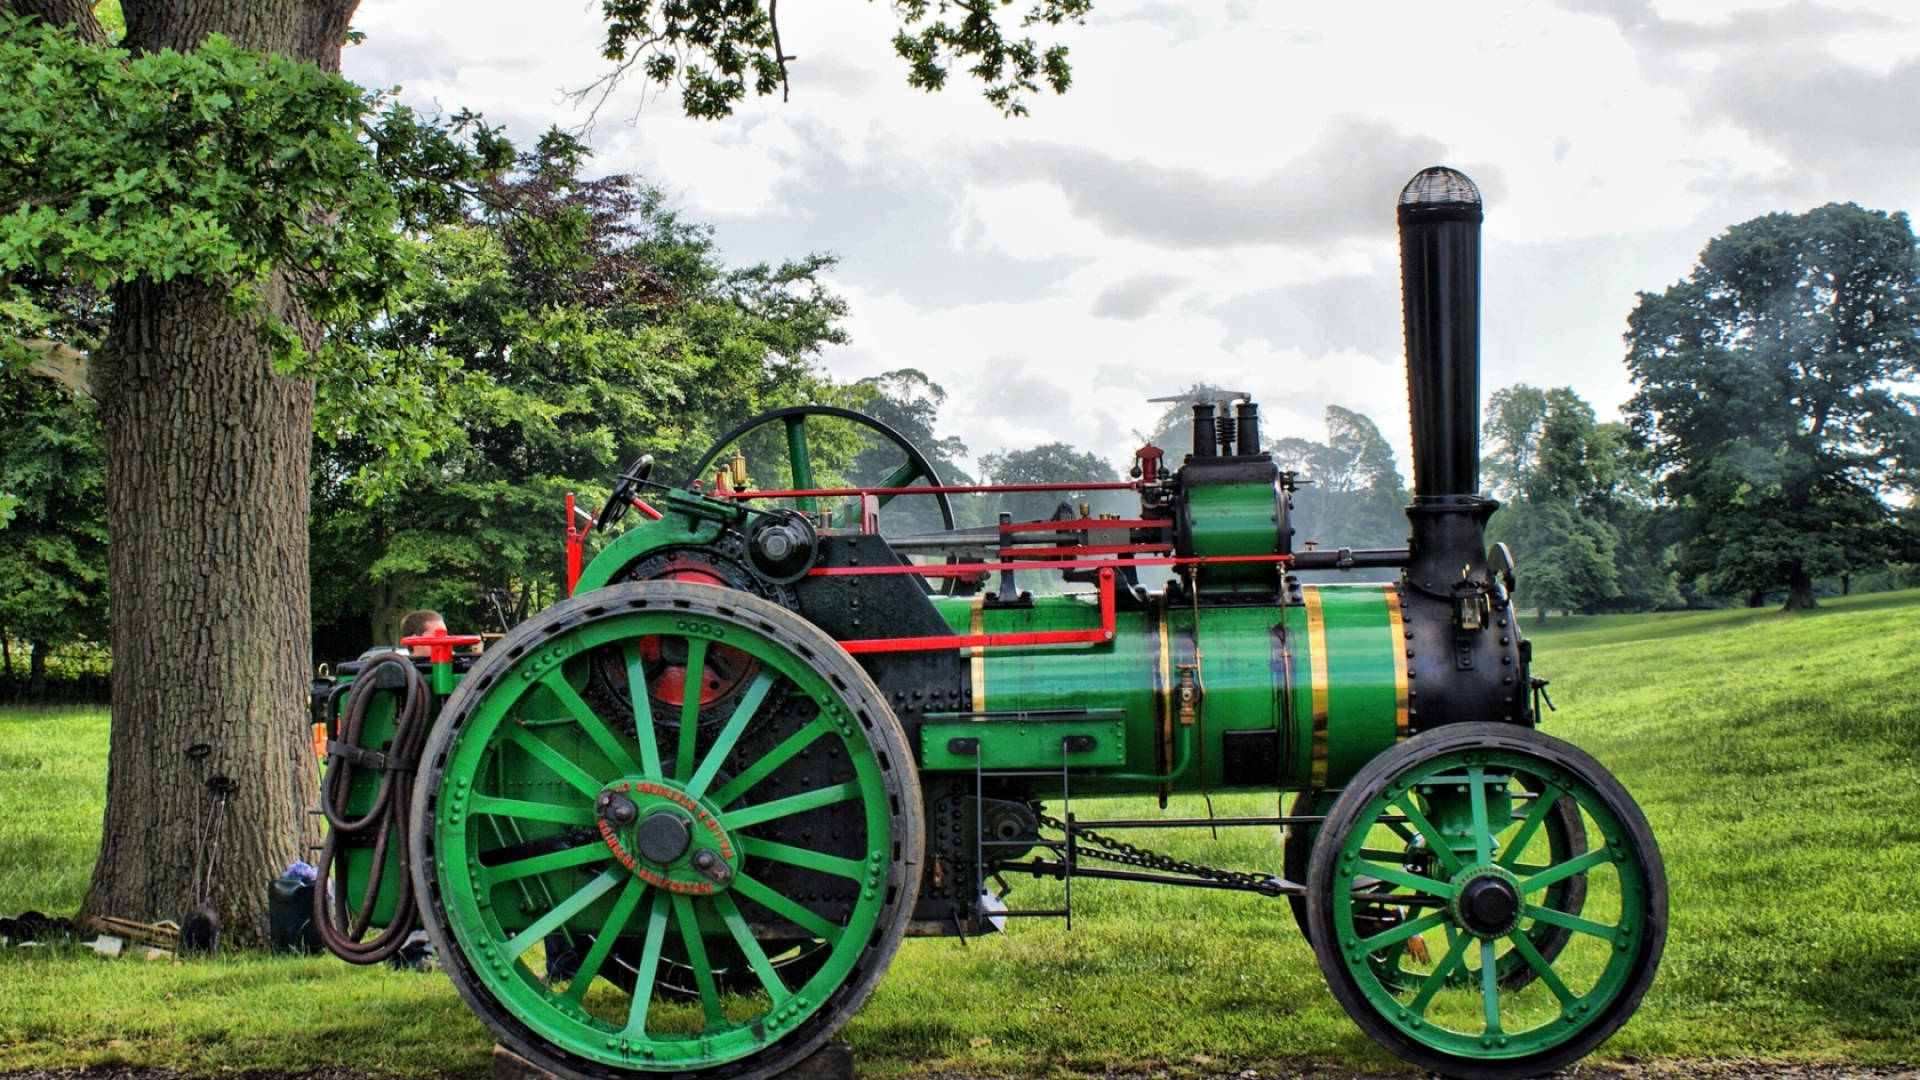 A Traditional Steam Tractor in its Glory Wallpaper